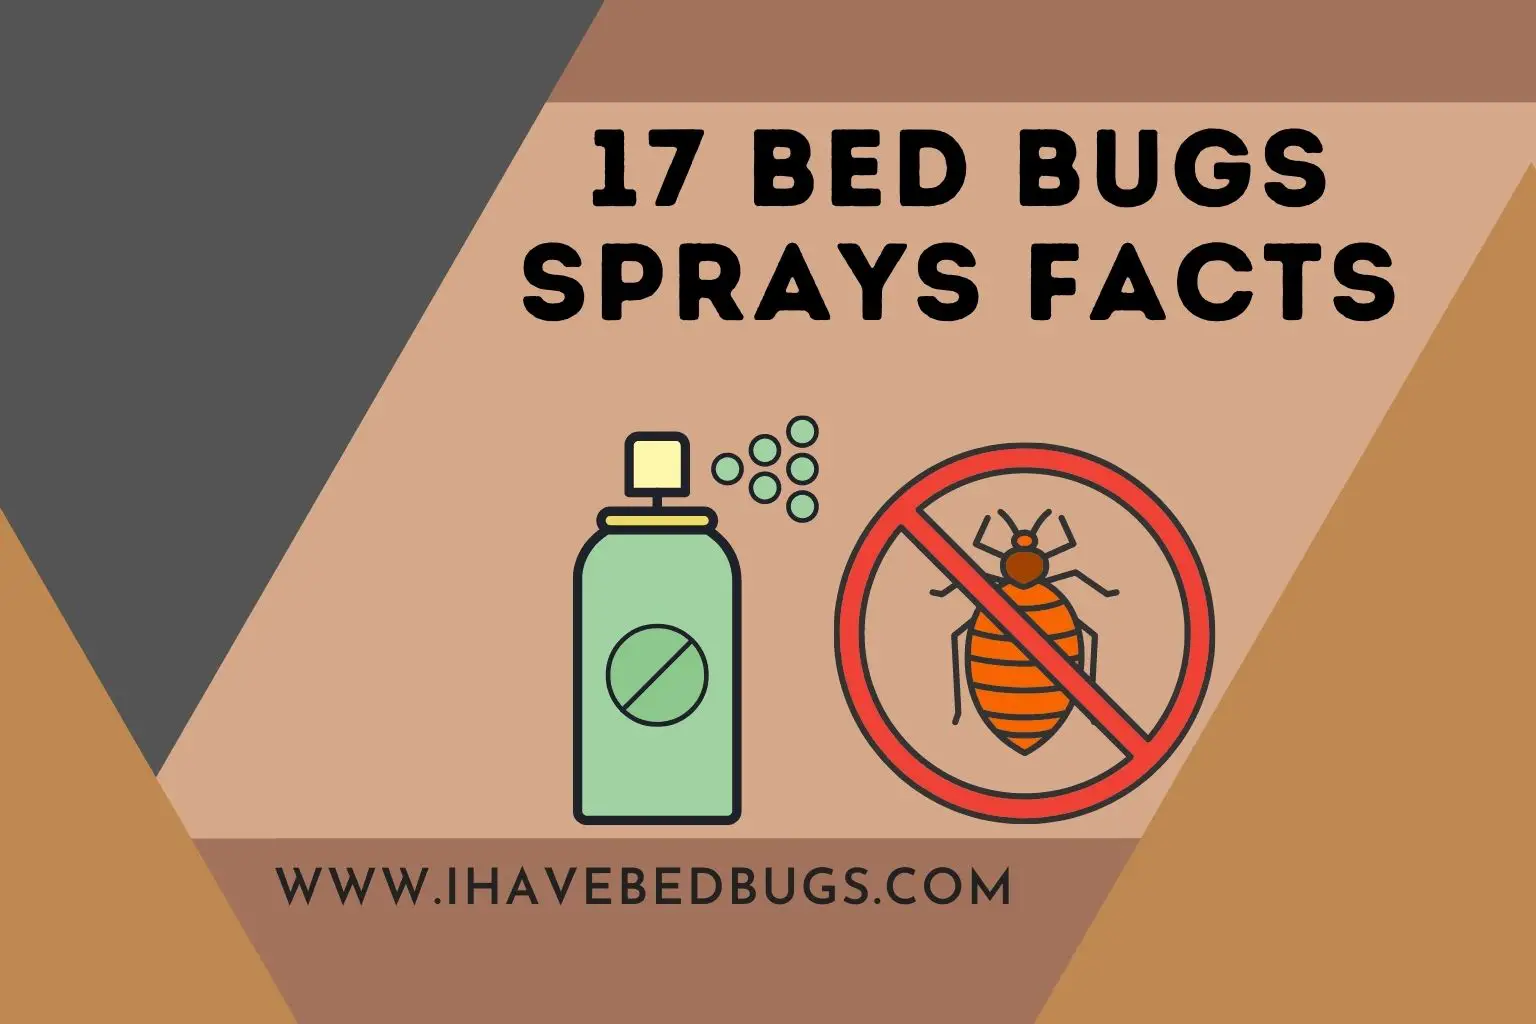 17 Bed Bugs Sprays Facts